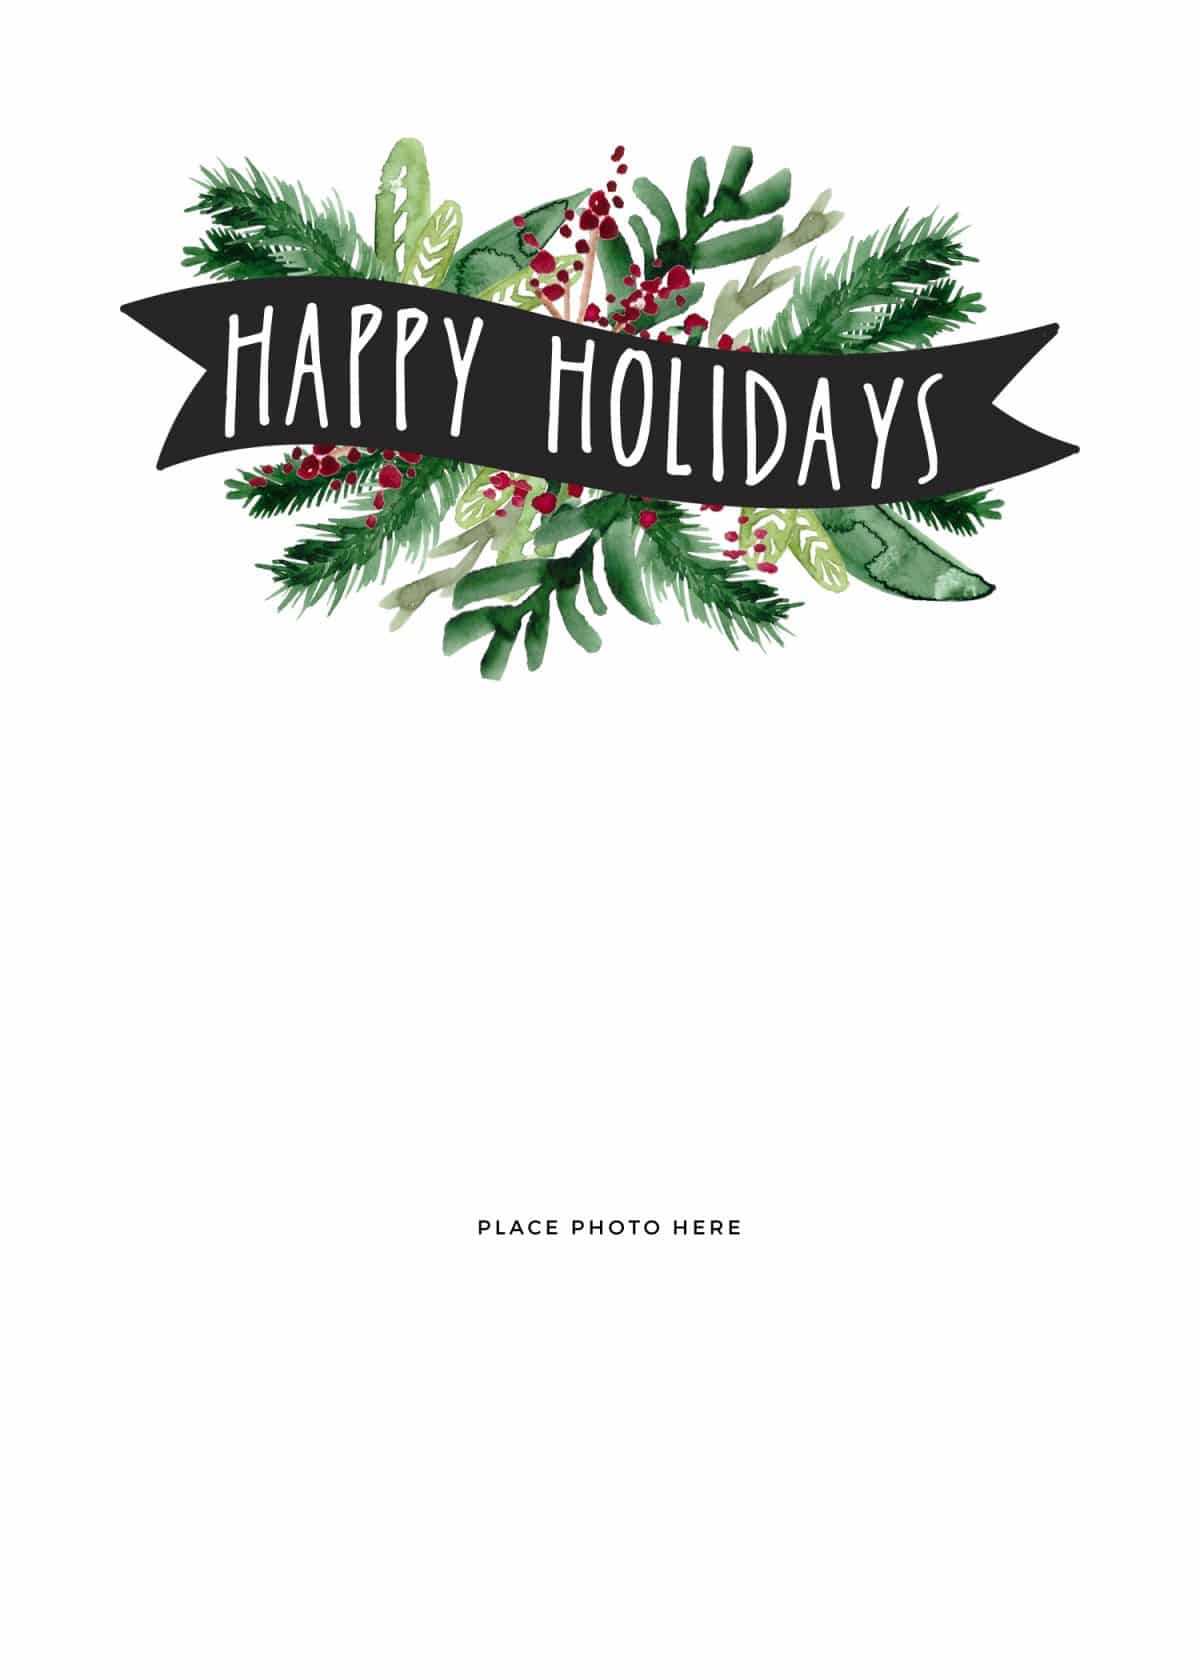 Make Your Own Photo Christmas Cards (For Free!) - Somewhat Within Diy Christmas Card Templates